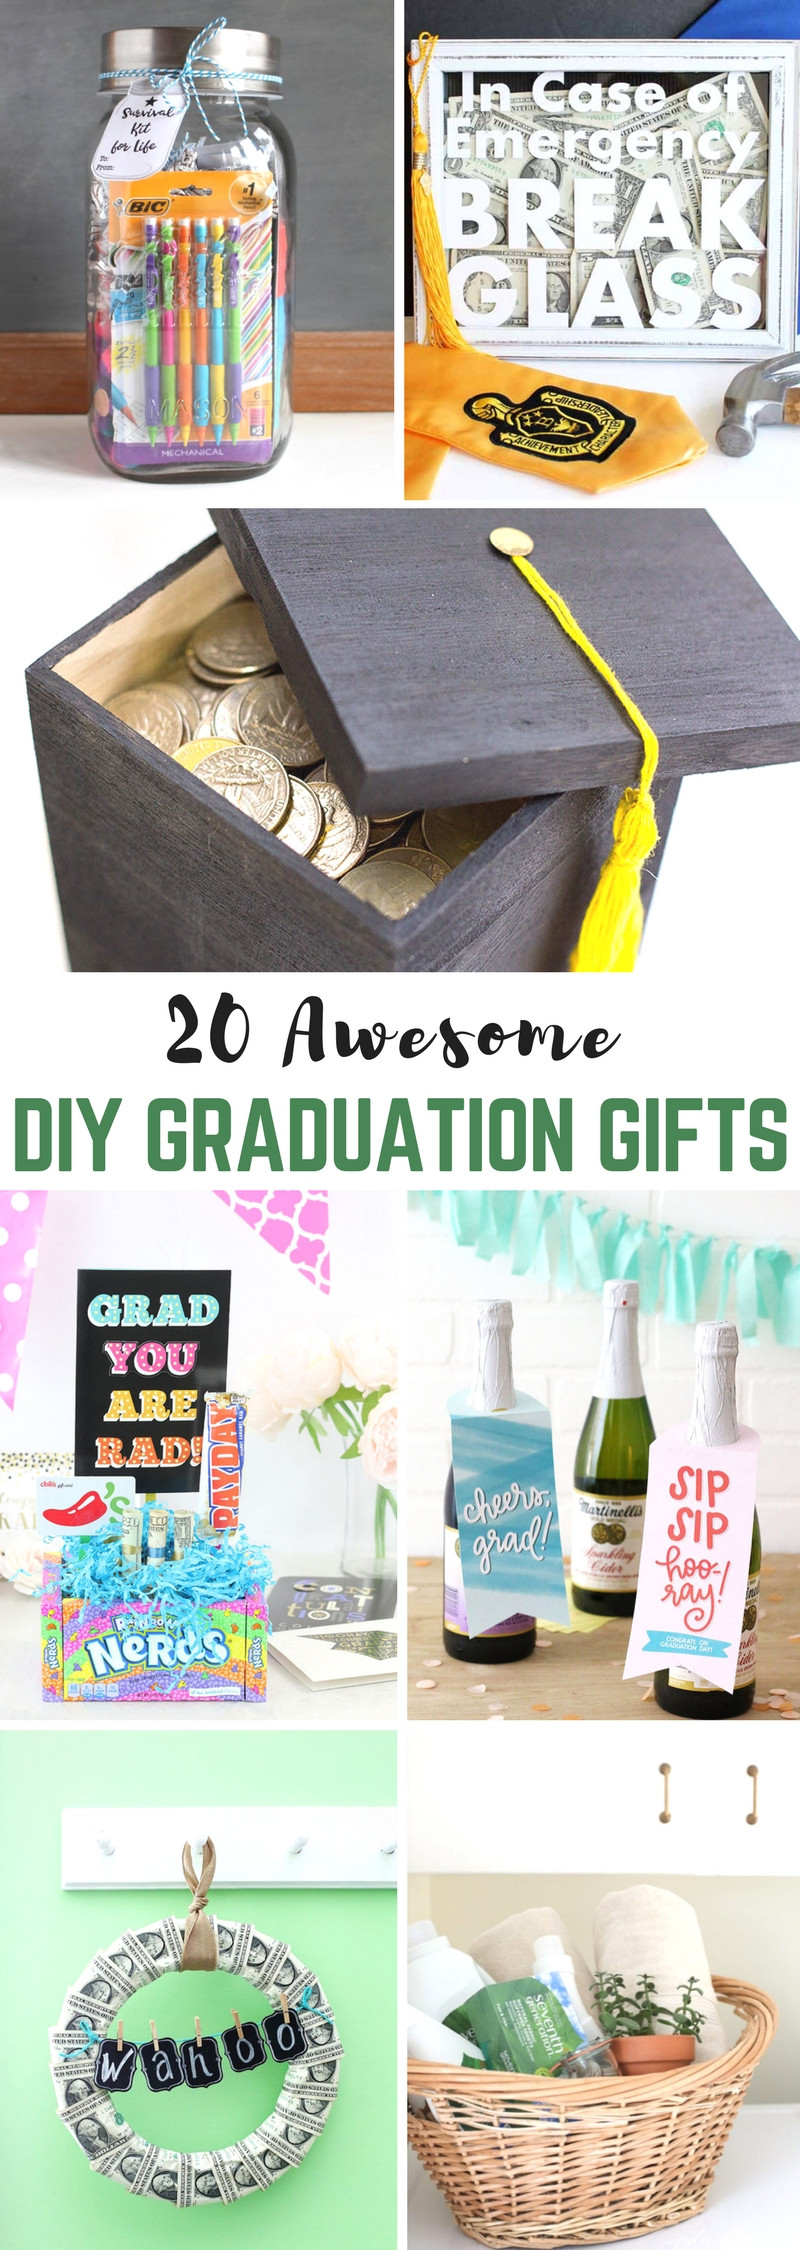 Awesome DIY Gifts
 20 Awesome DIY Graduation Gifts